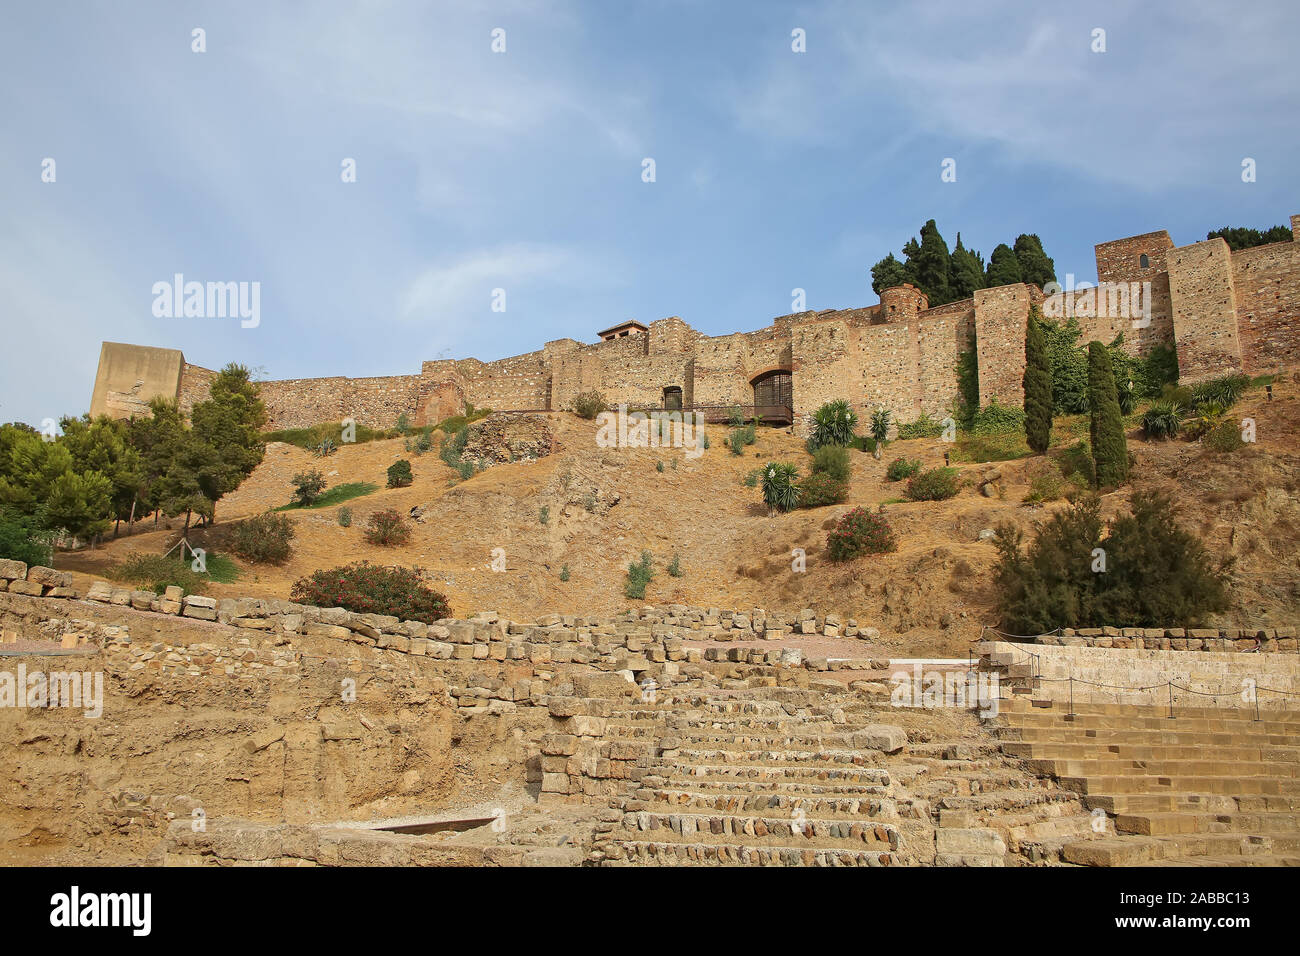 Castle of Gibralfaro with the roman theatre in the foreground, Malaga, Andalusia, Southern Spain. Stock Photo